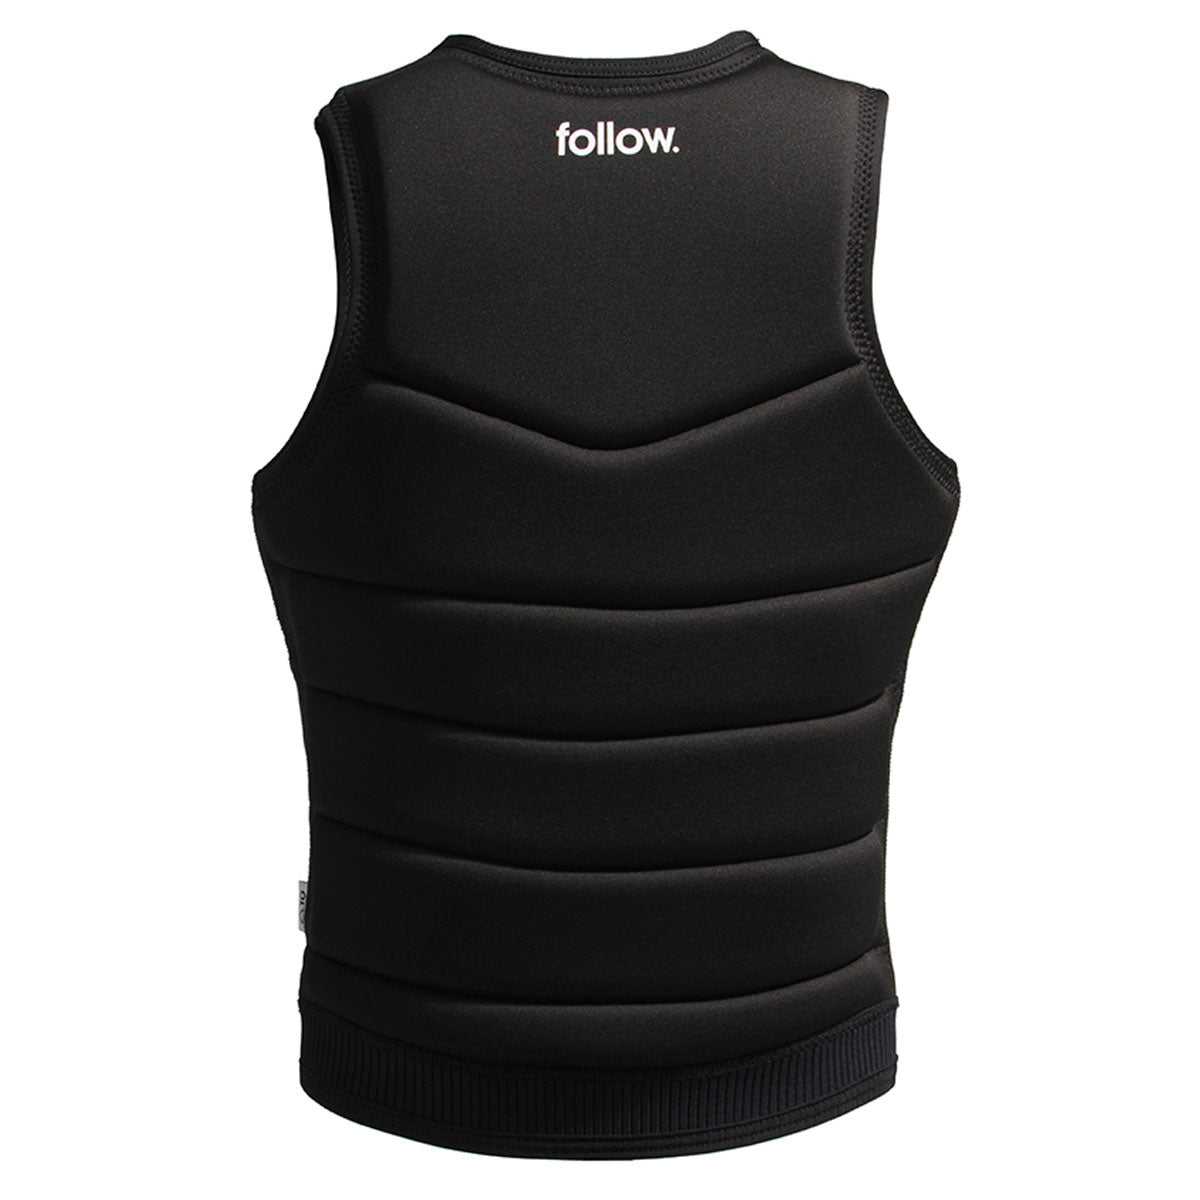 A black vest with the word "Follow" on it, offering revved-up goodness for ladies' fashion - The 2021 Follow Primary Ladies Jacket - Black from Follow Wake.